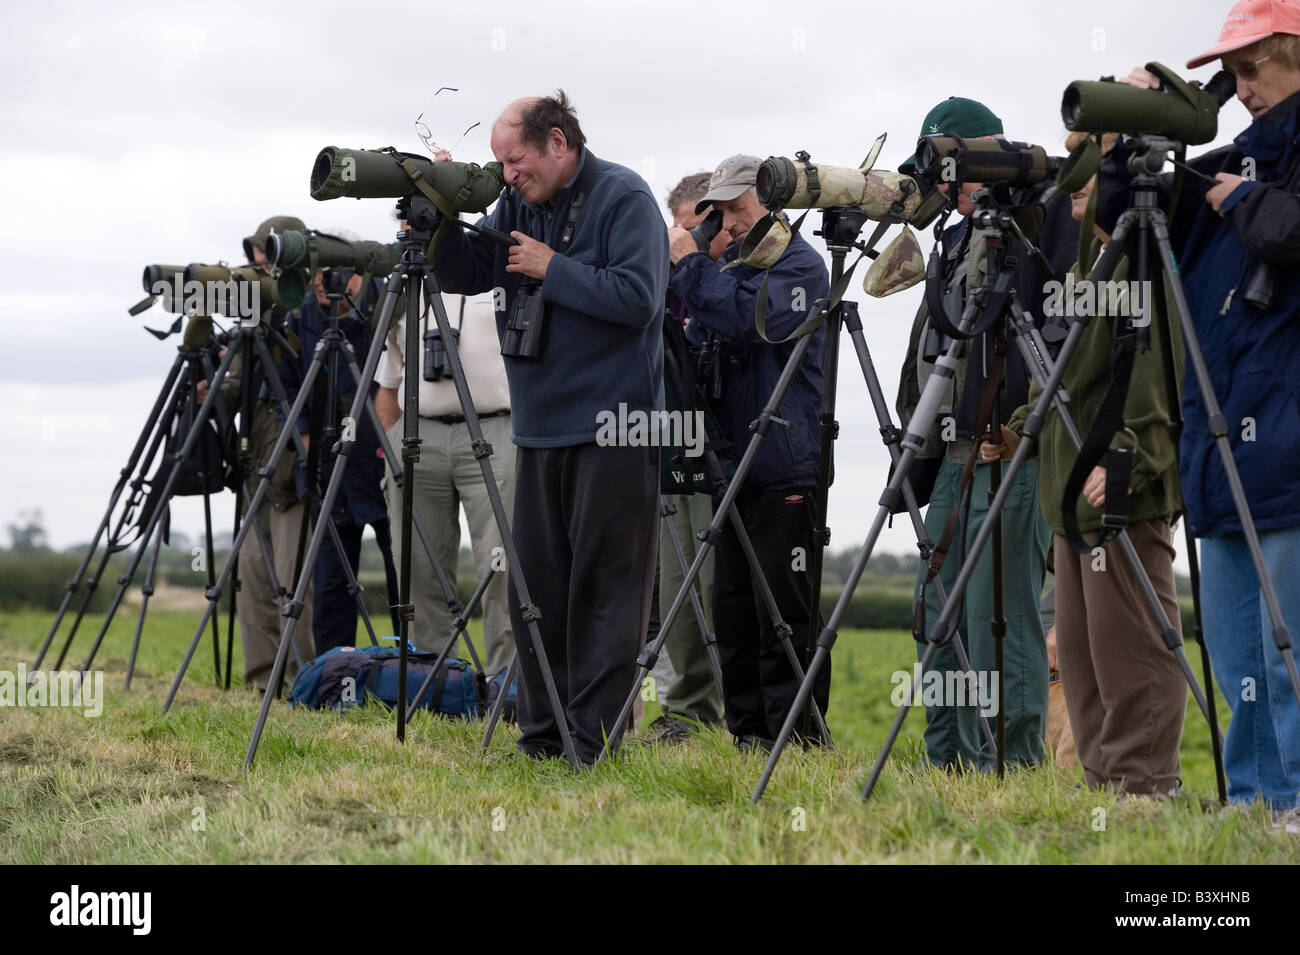 A group of twitchers armed with telescopes on tripods look for a rare bird near York Yorkshire UK Stock Photo